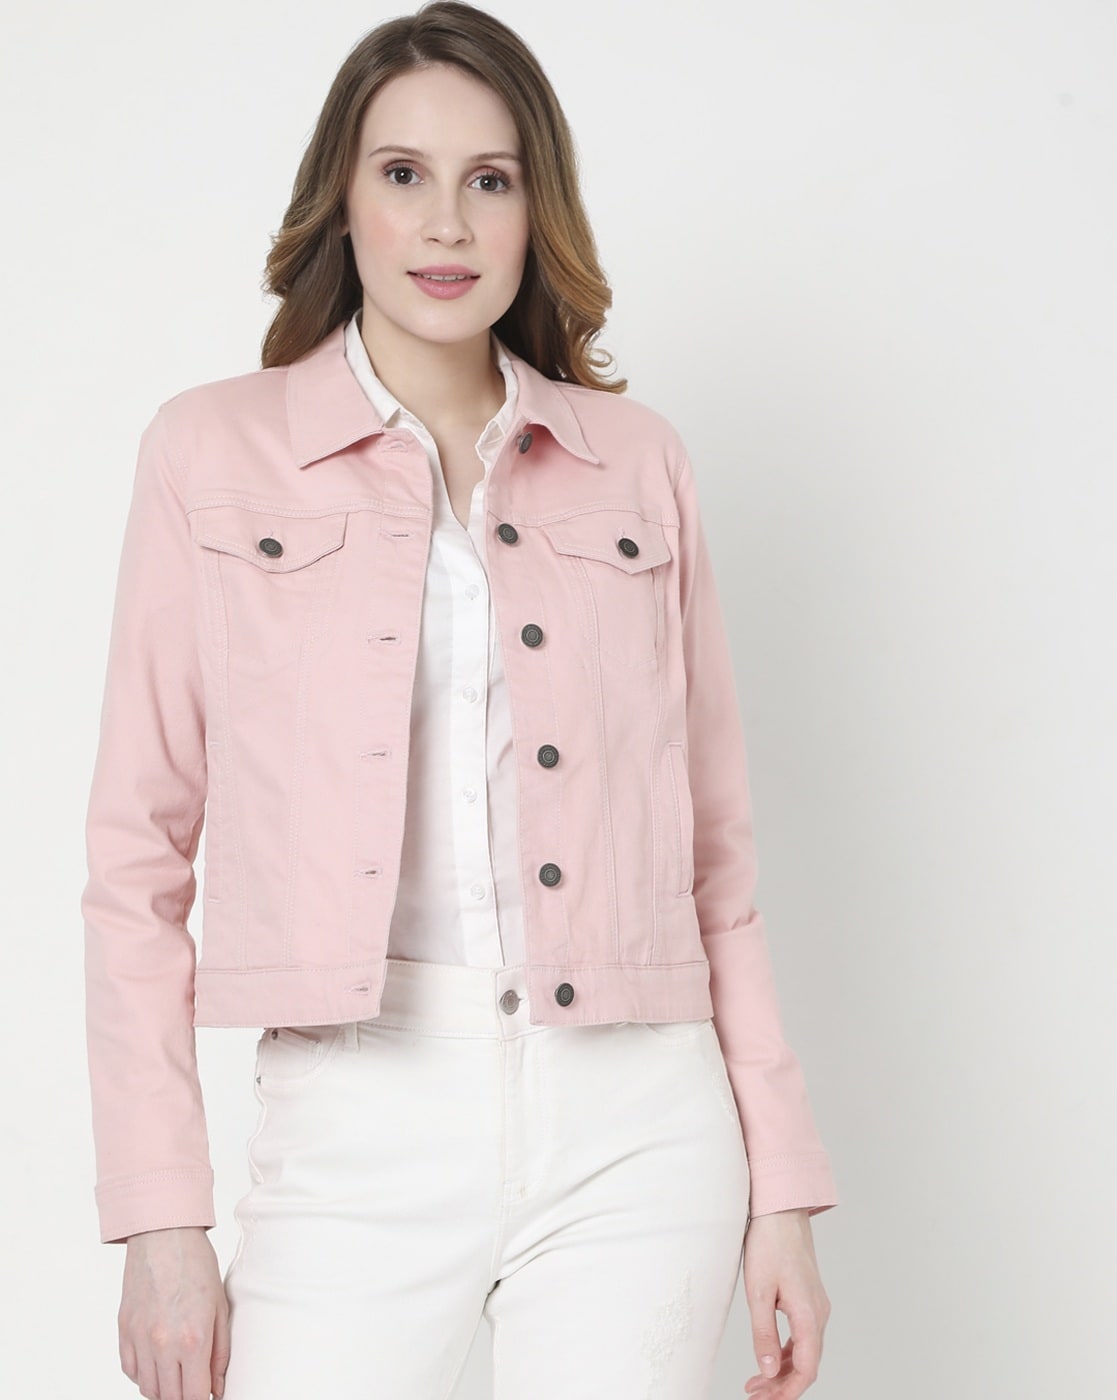 Elm Jacket Jean Tilly - Brands-Ladies : Yarntons | New Zealand's Trusted  Fashion Retailer Online - Elm AW21